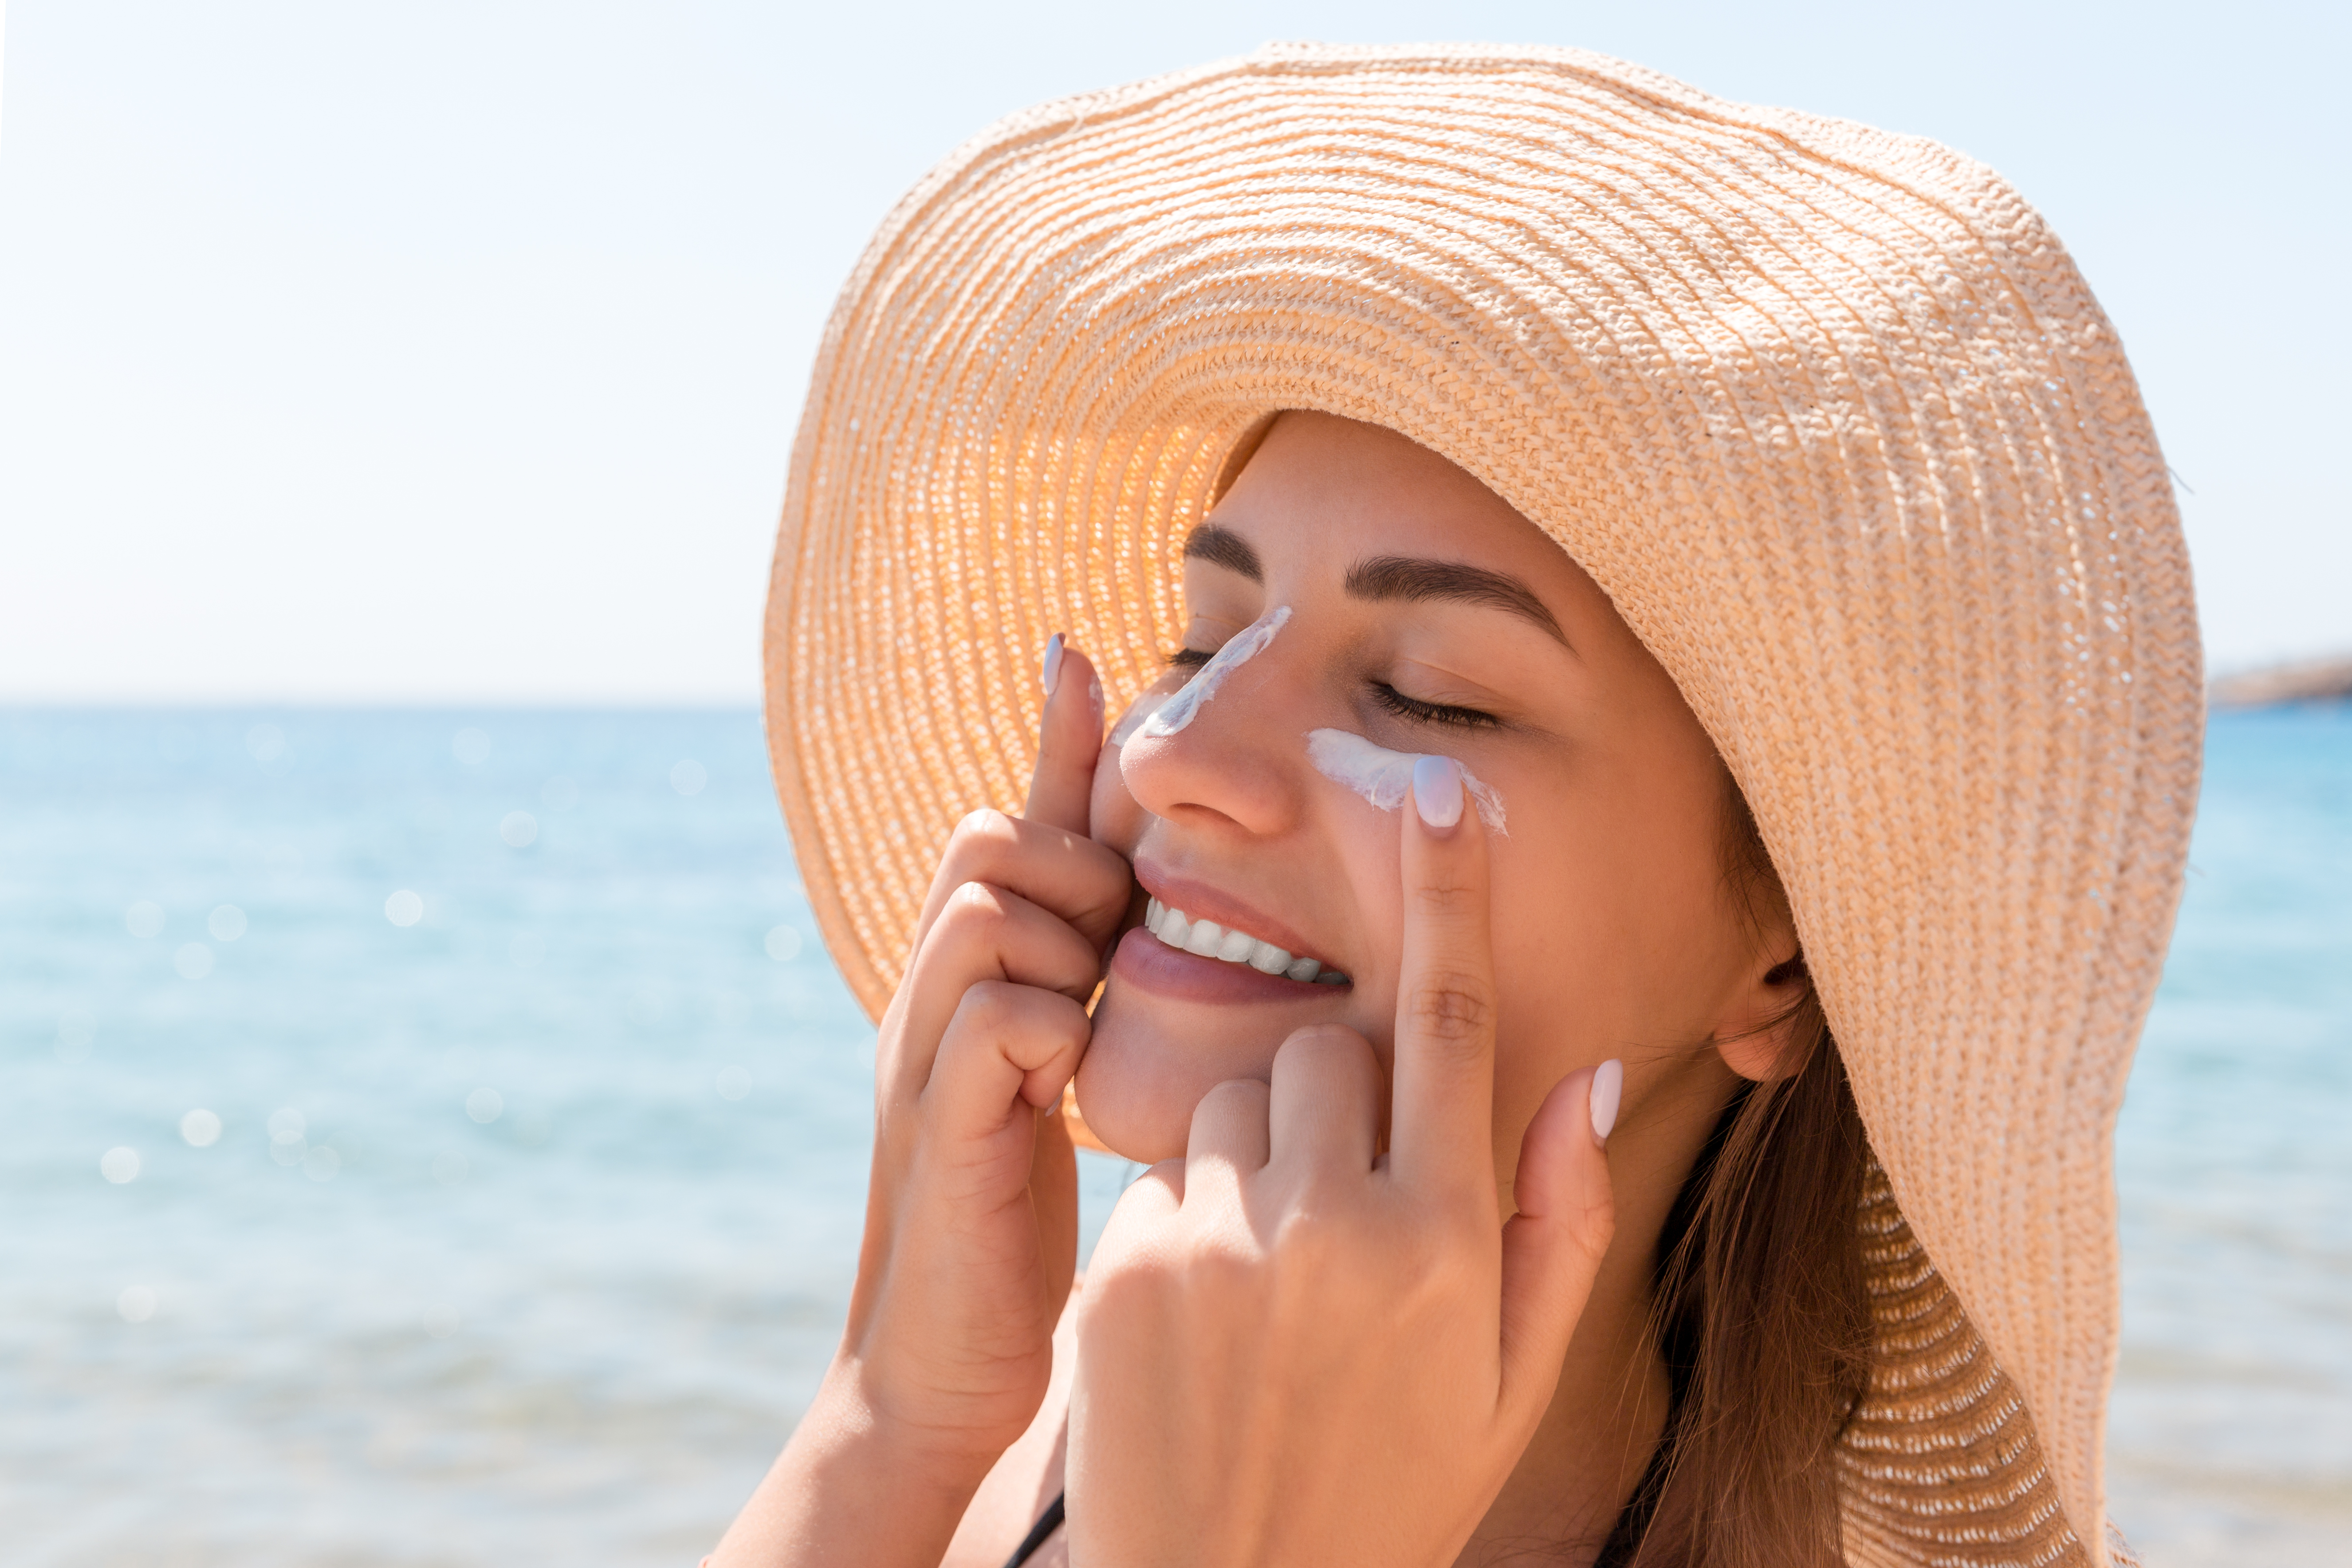 Woman applying sunscreen to her face on the beach | Source: Shutterstock